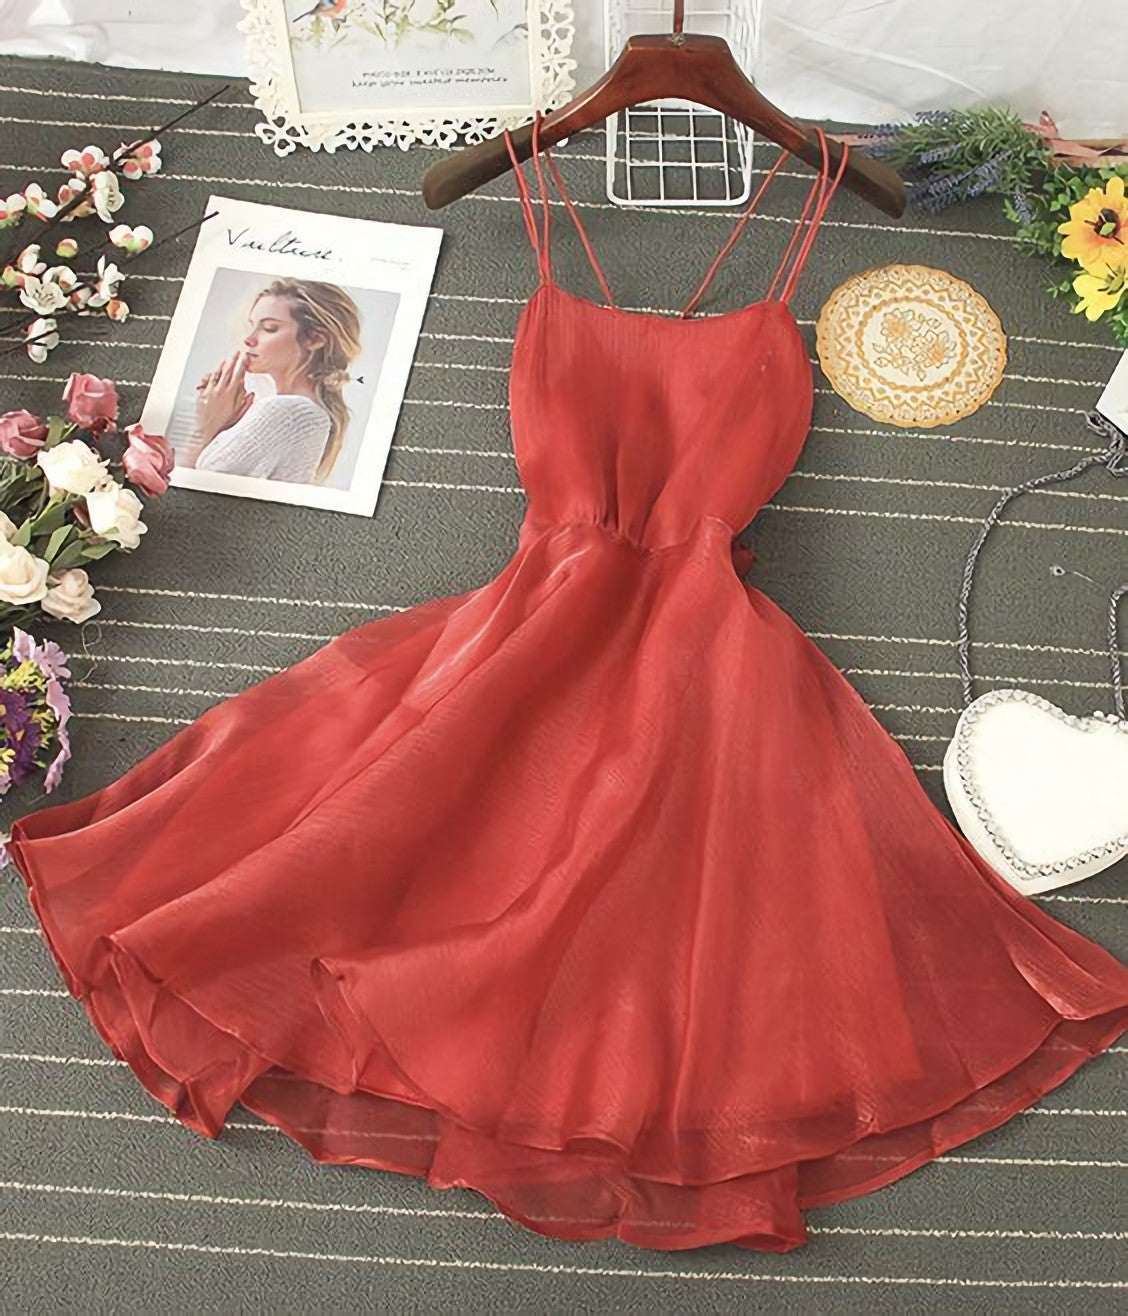 Cute Tulle Backless Short Dress, Mini Corset Homecoming Dress outfit, Prom Dress 2031